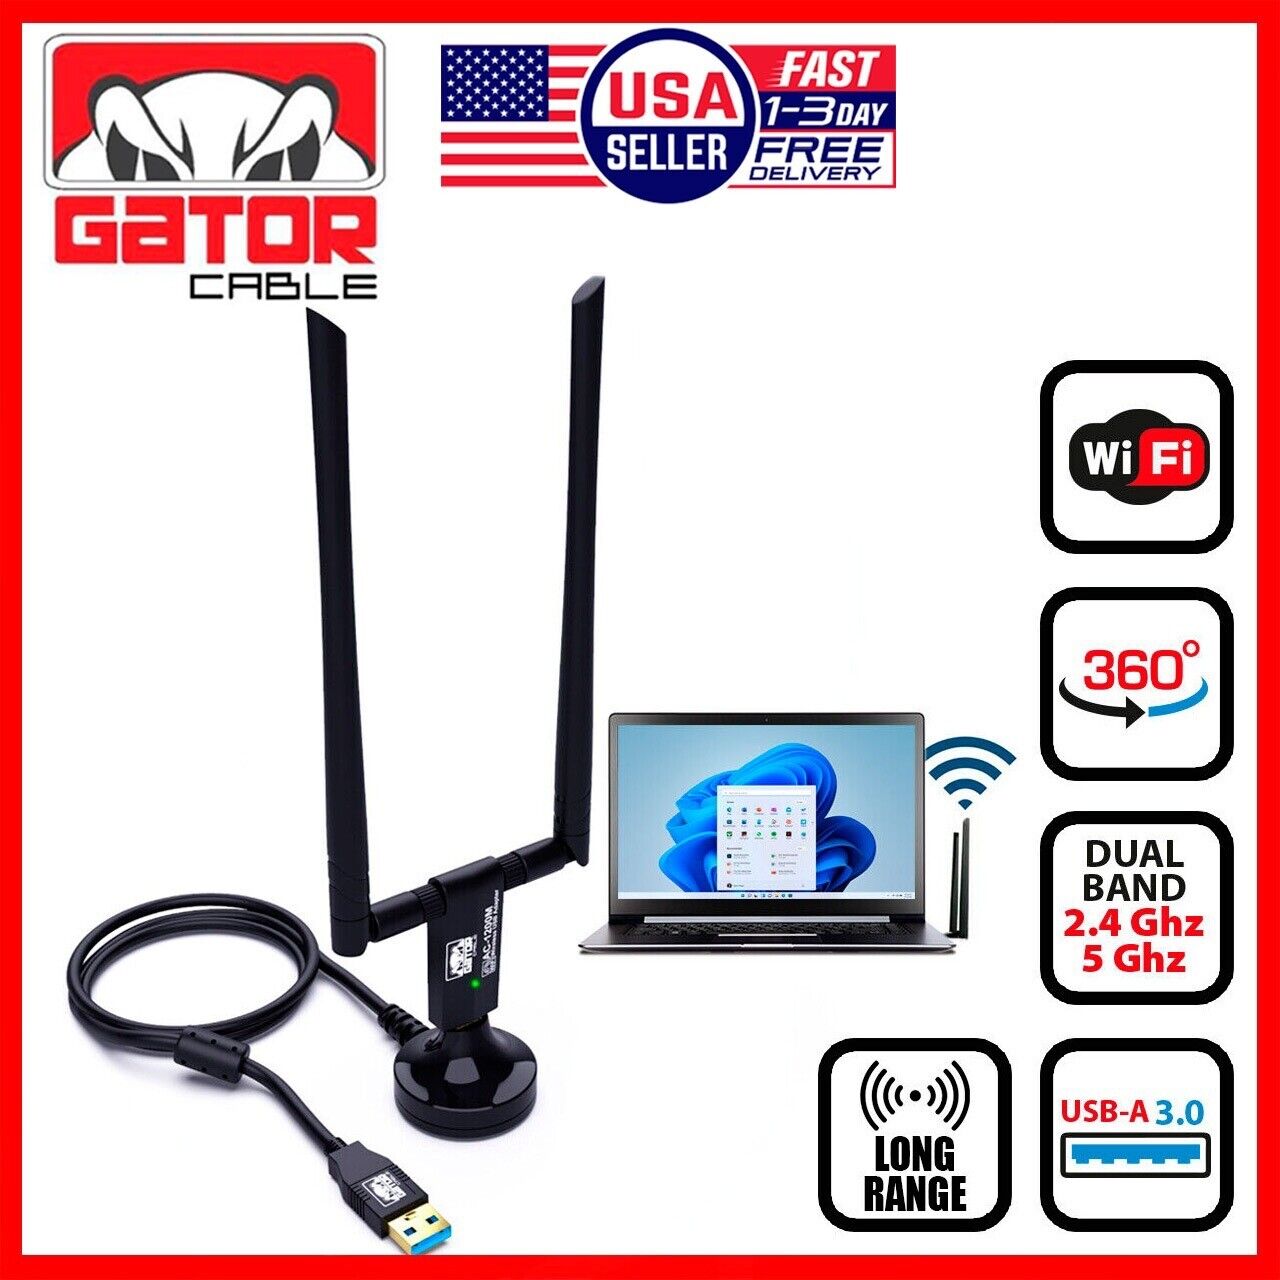 WiFi Wireless Antenna USB 3.0 Adapter Long Range 1200Mbps Dual Band 5GHz 2.4GHz